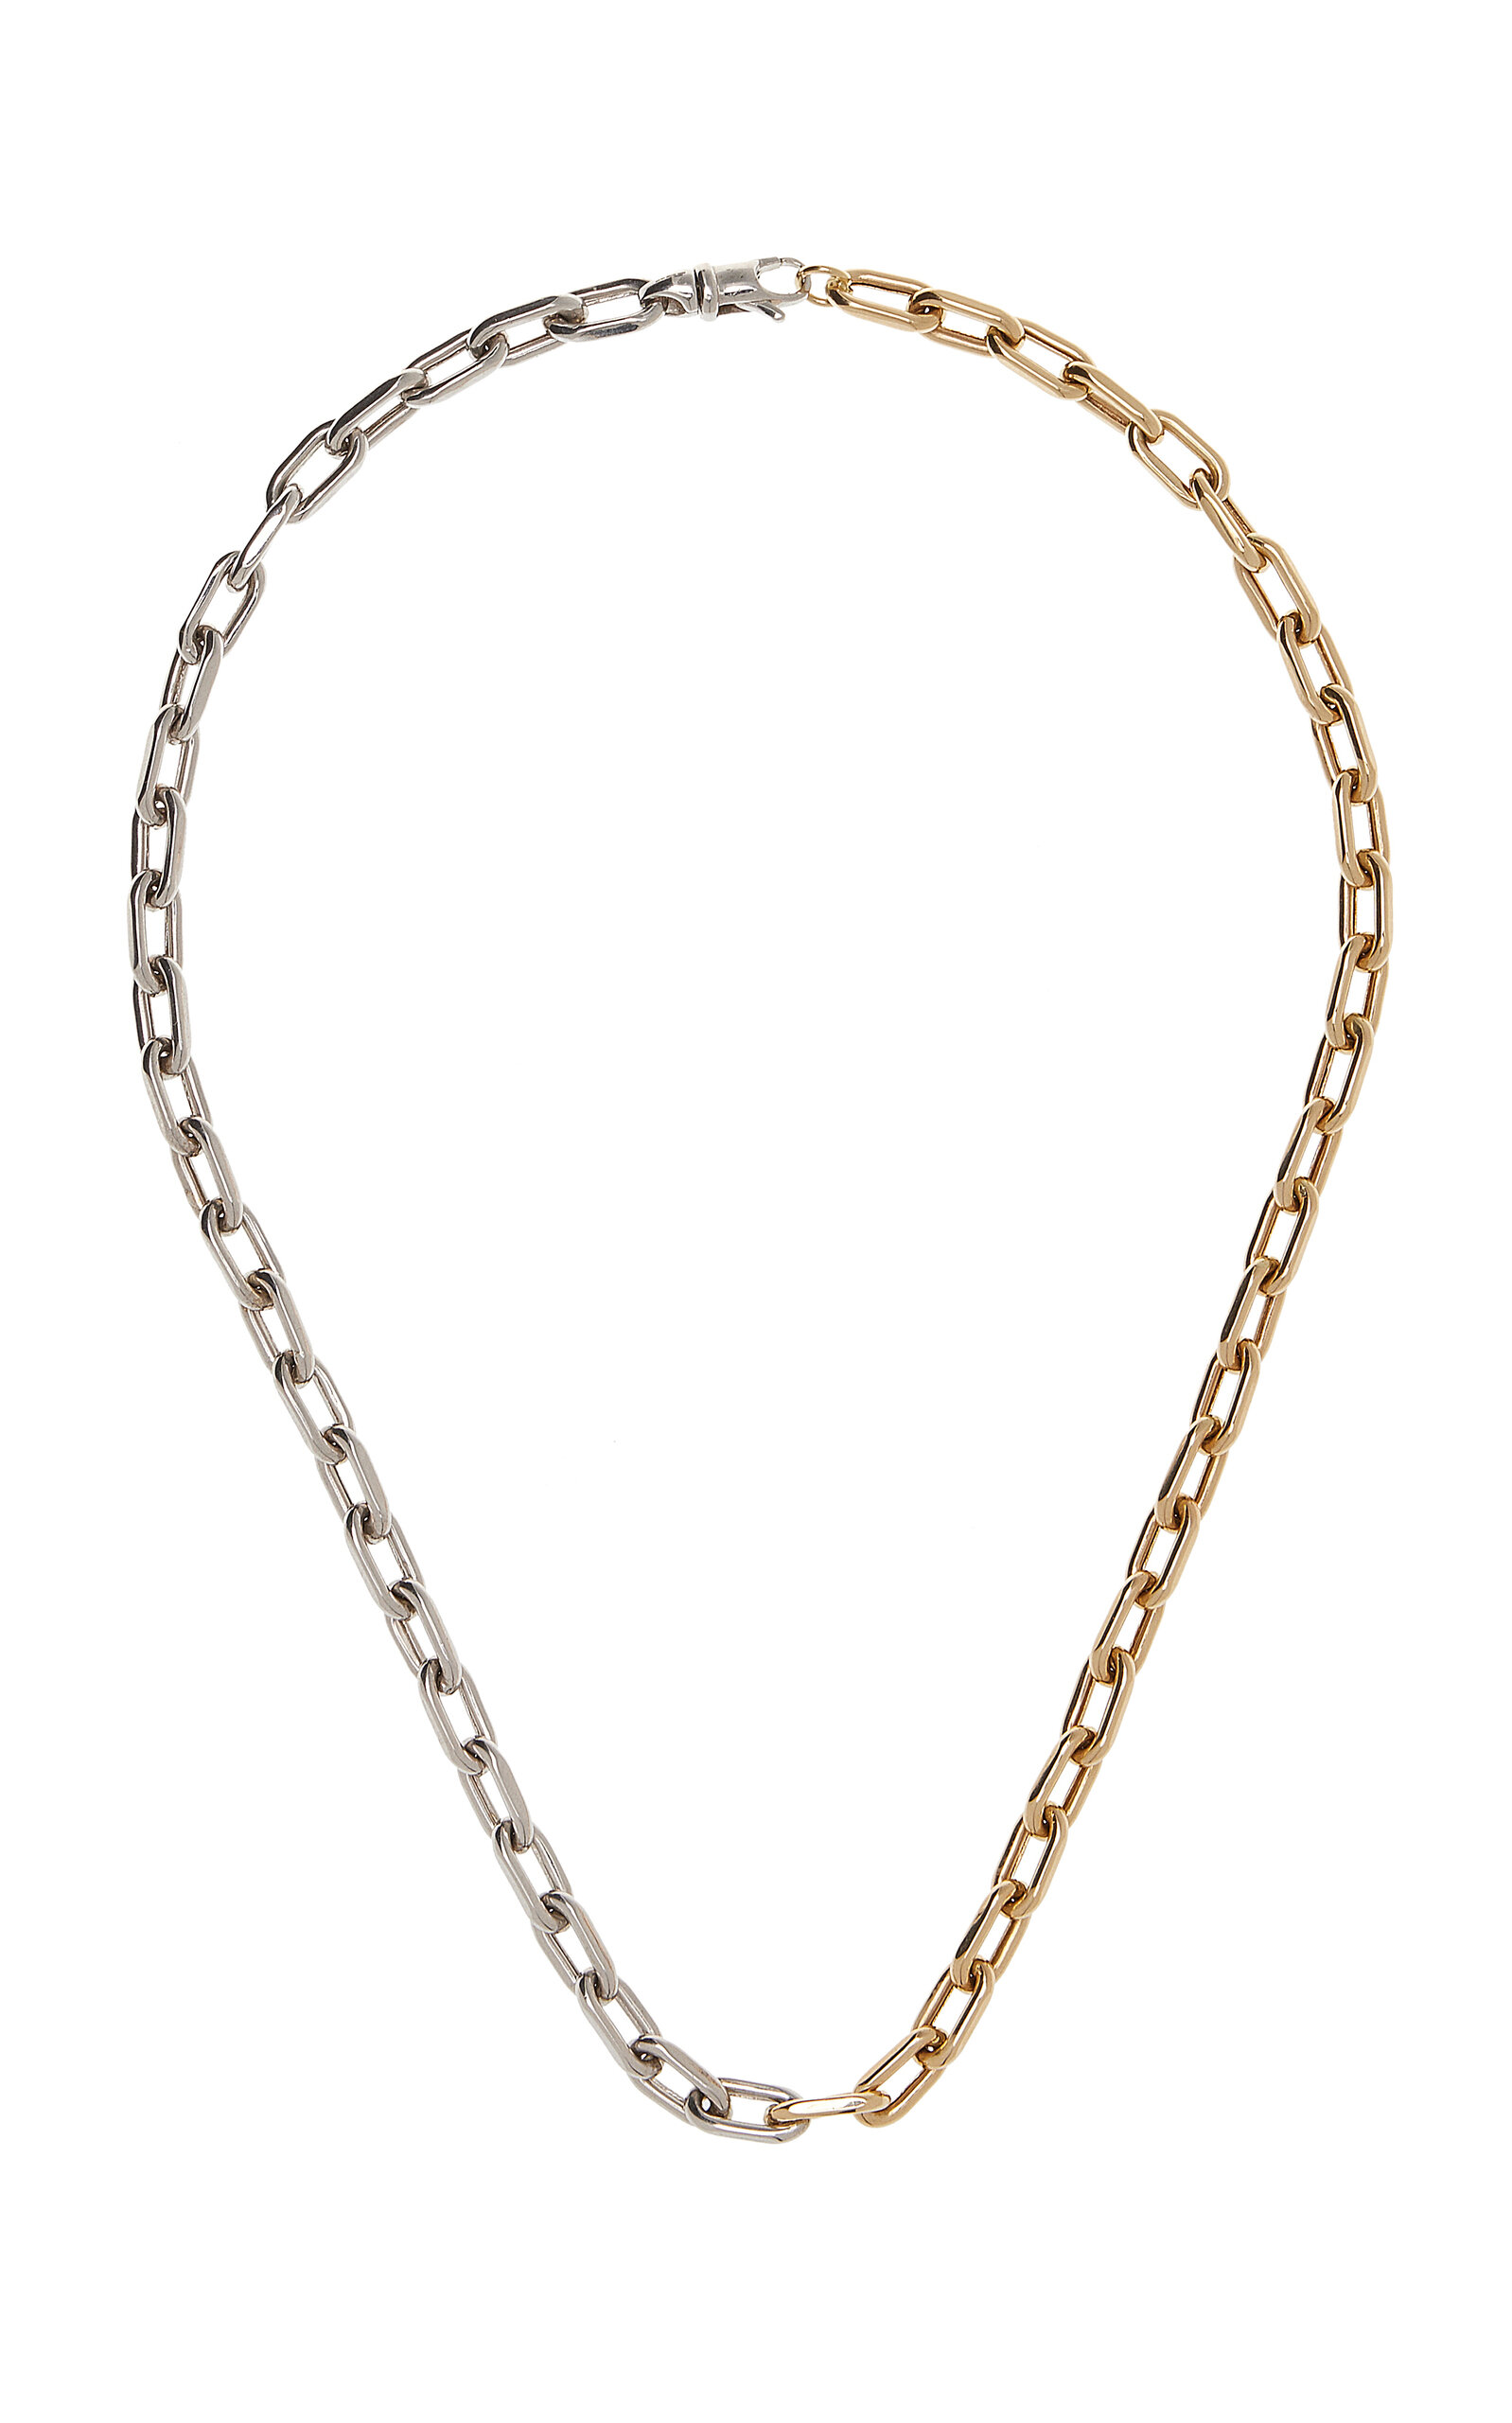 Adina Reyter 14k Yellow Gold; Sterling Silver Chain Necklace